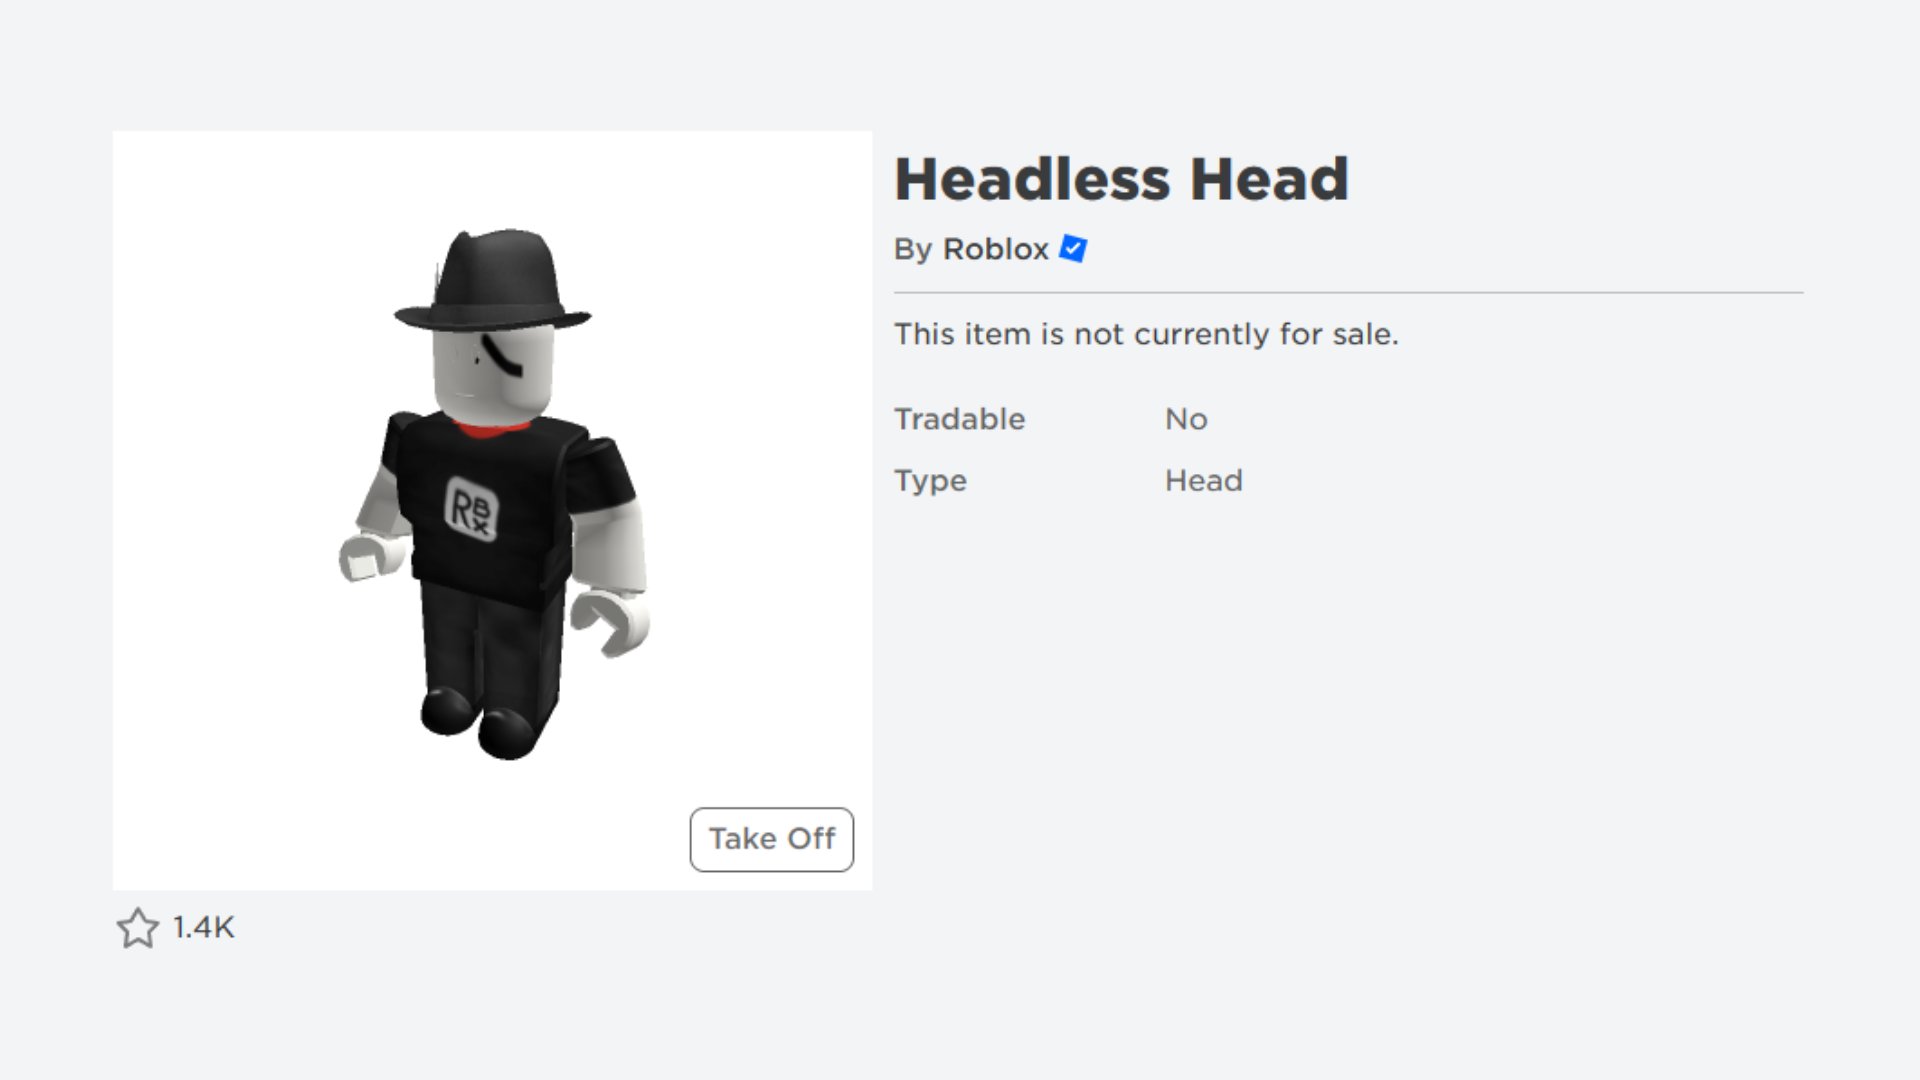 How to get the Headless Head in Roblox